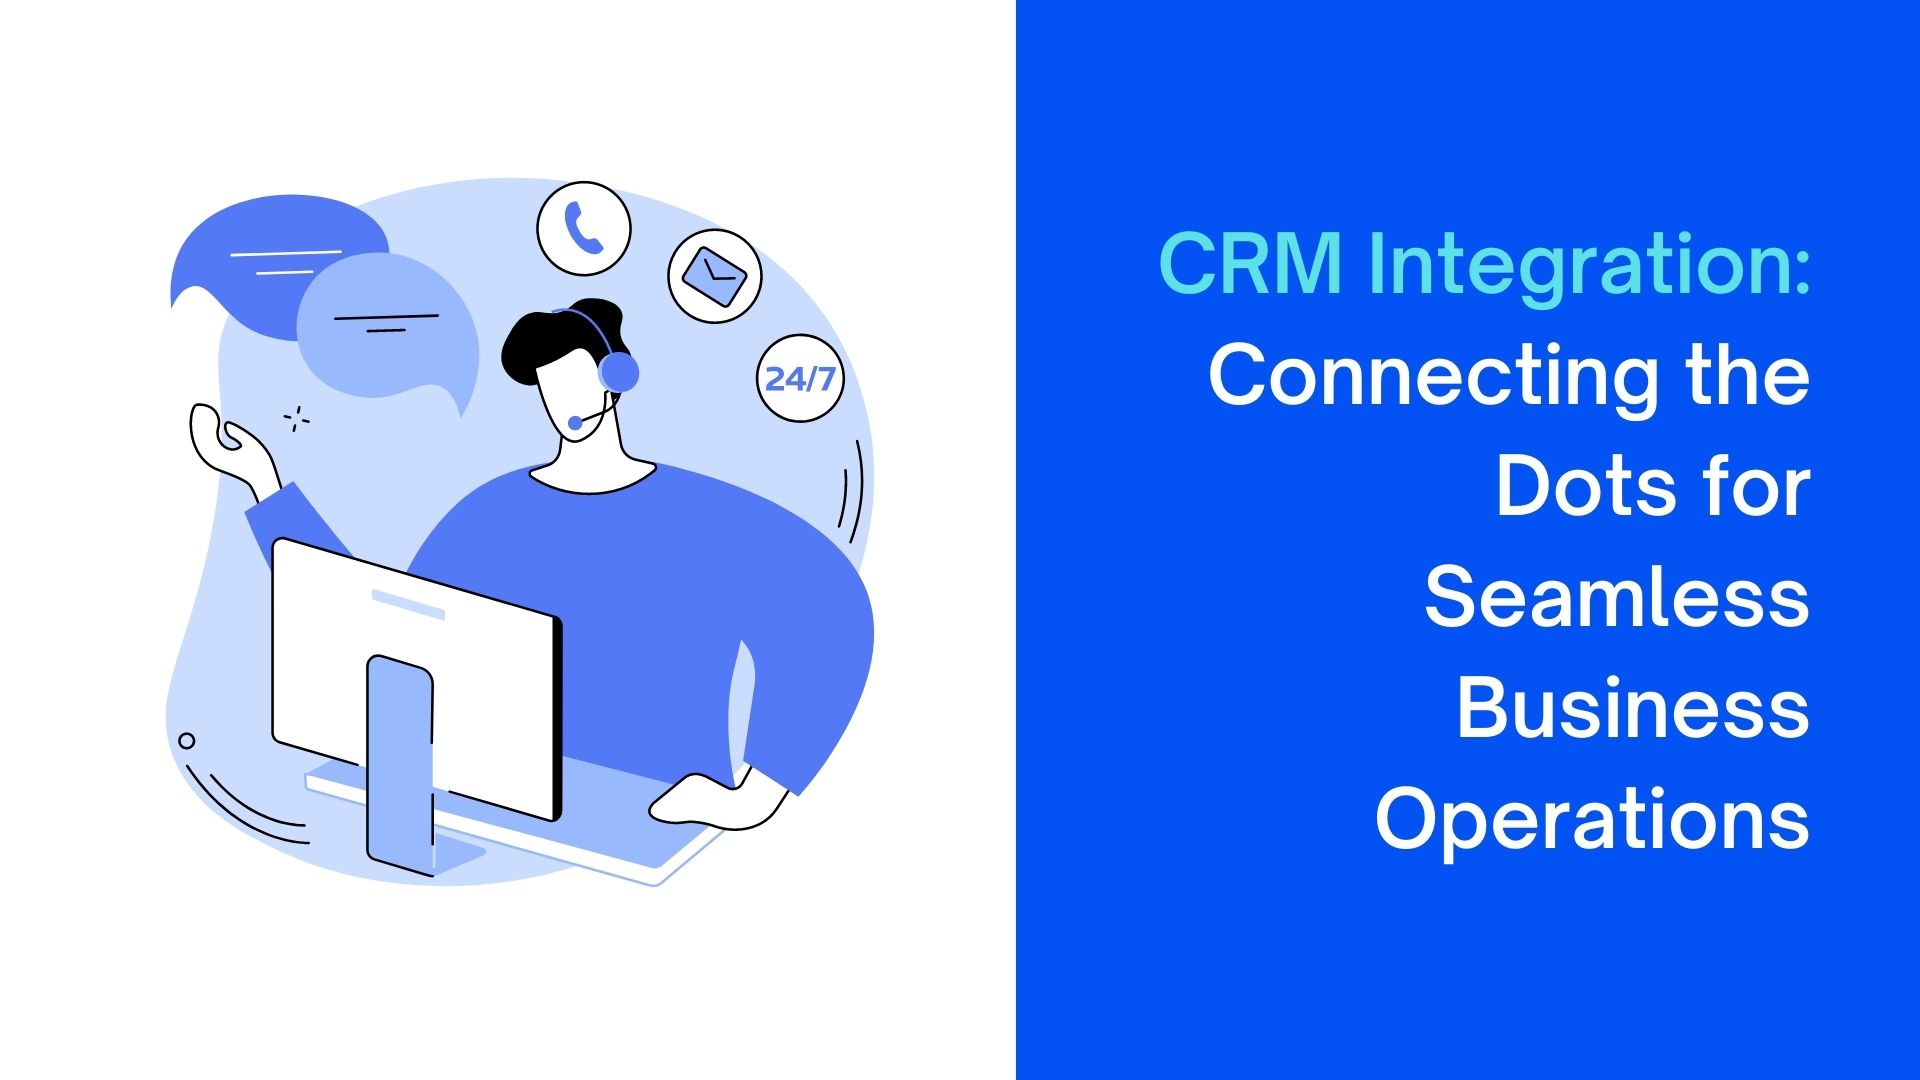 CRM Integration: Connecting the Dots for Seamless Business Operations